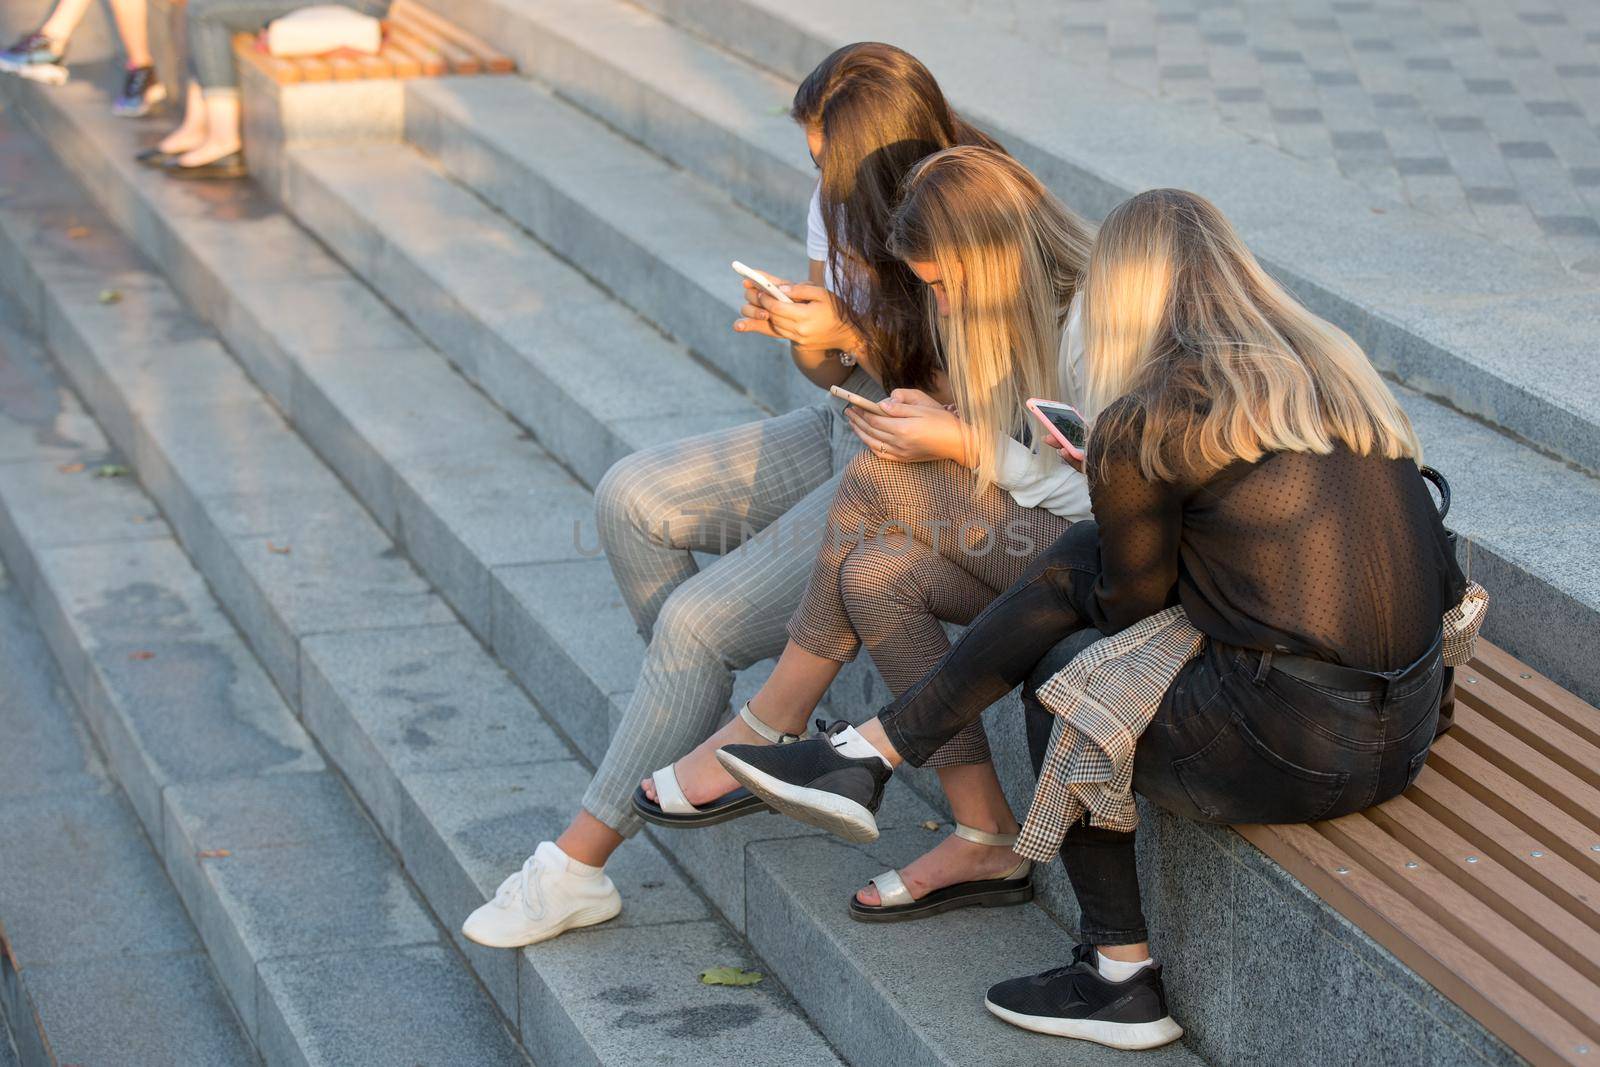 Ukraine. The city of Kharkov. September 10, 2019. Girls in the park view messages on their phones. by Yurii73